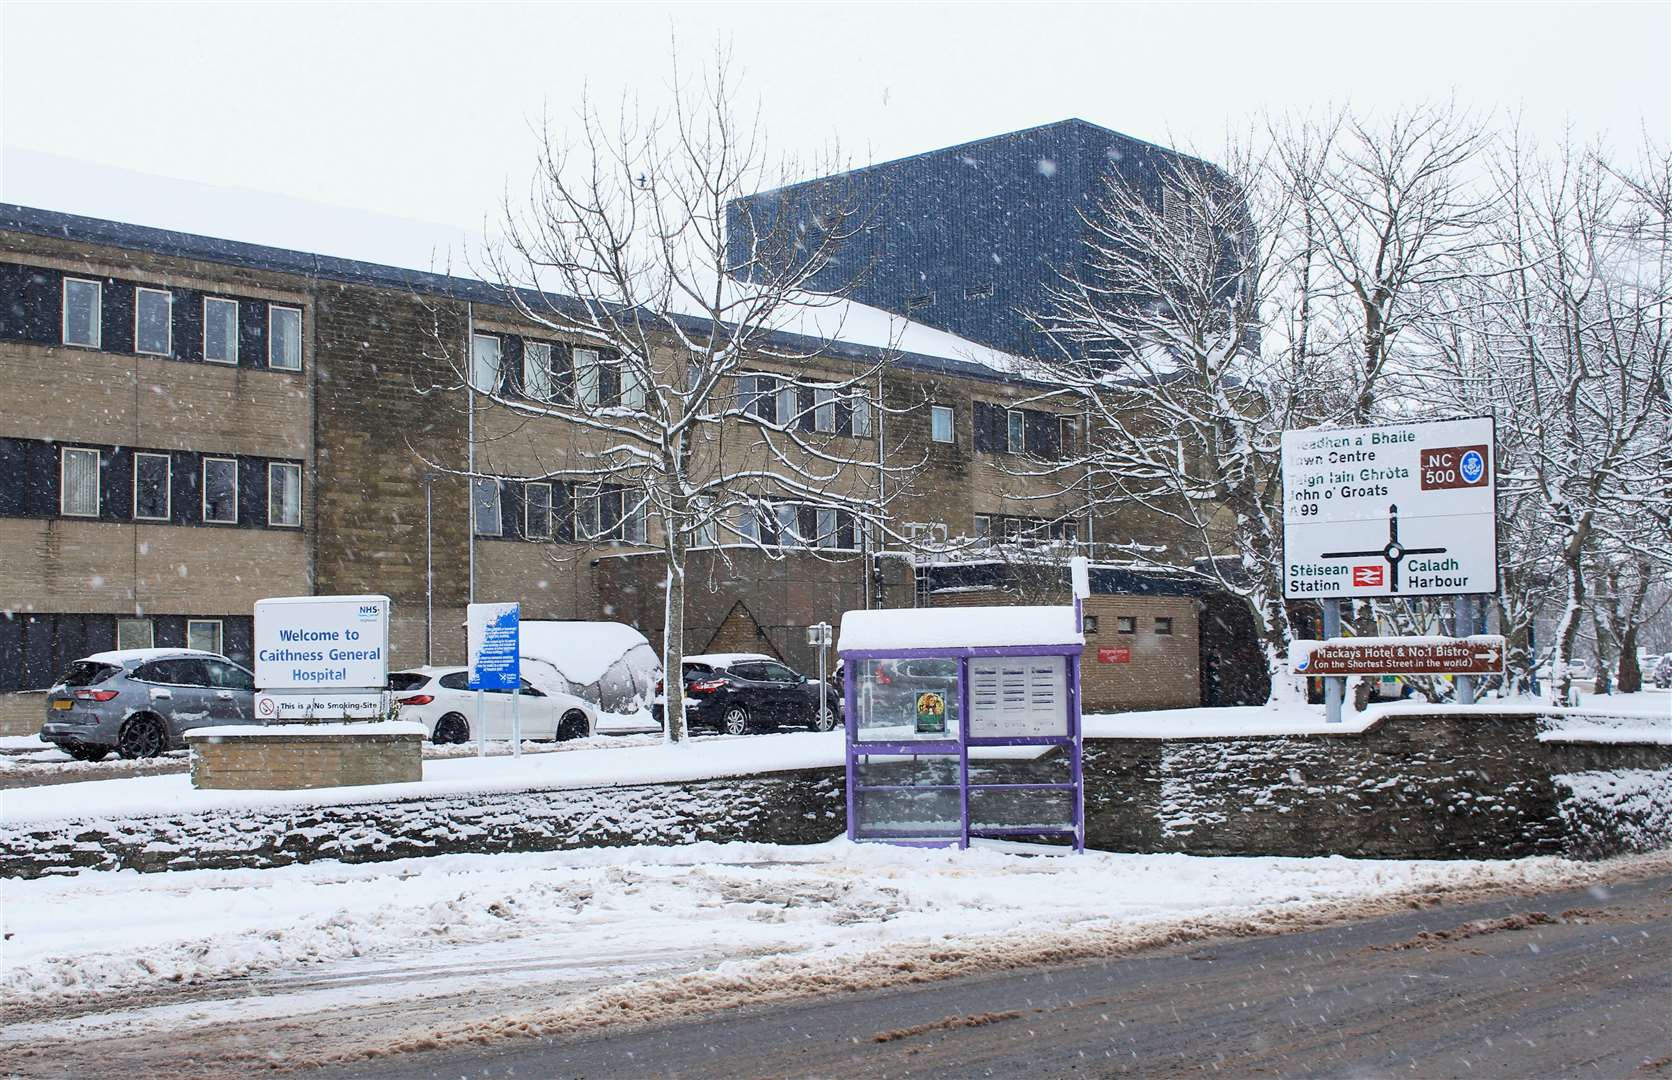 Caithness General Hospital was also due to be revamped but again it has sidelined.